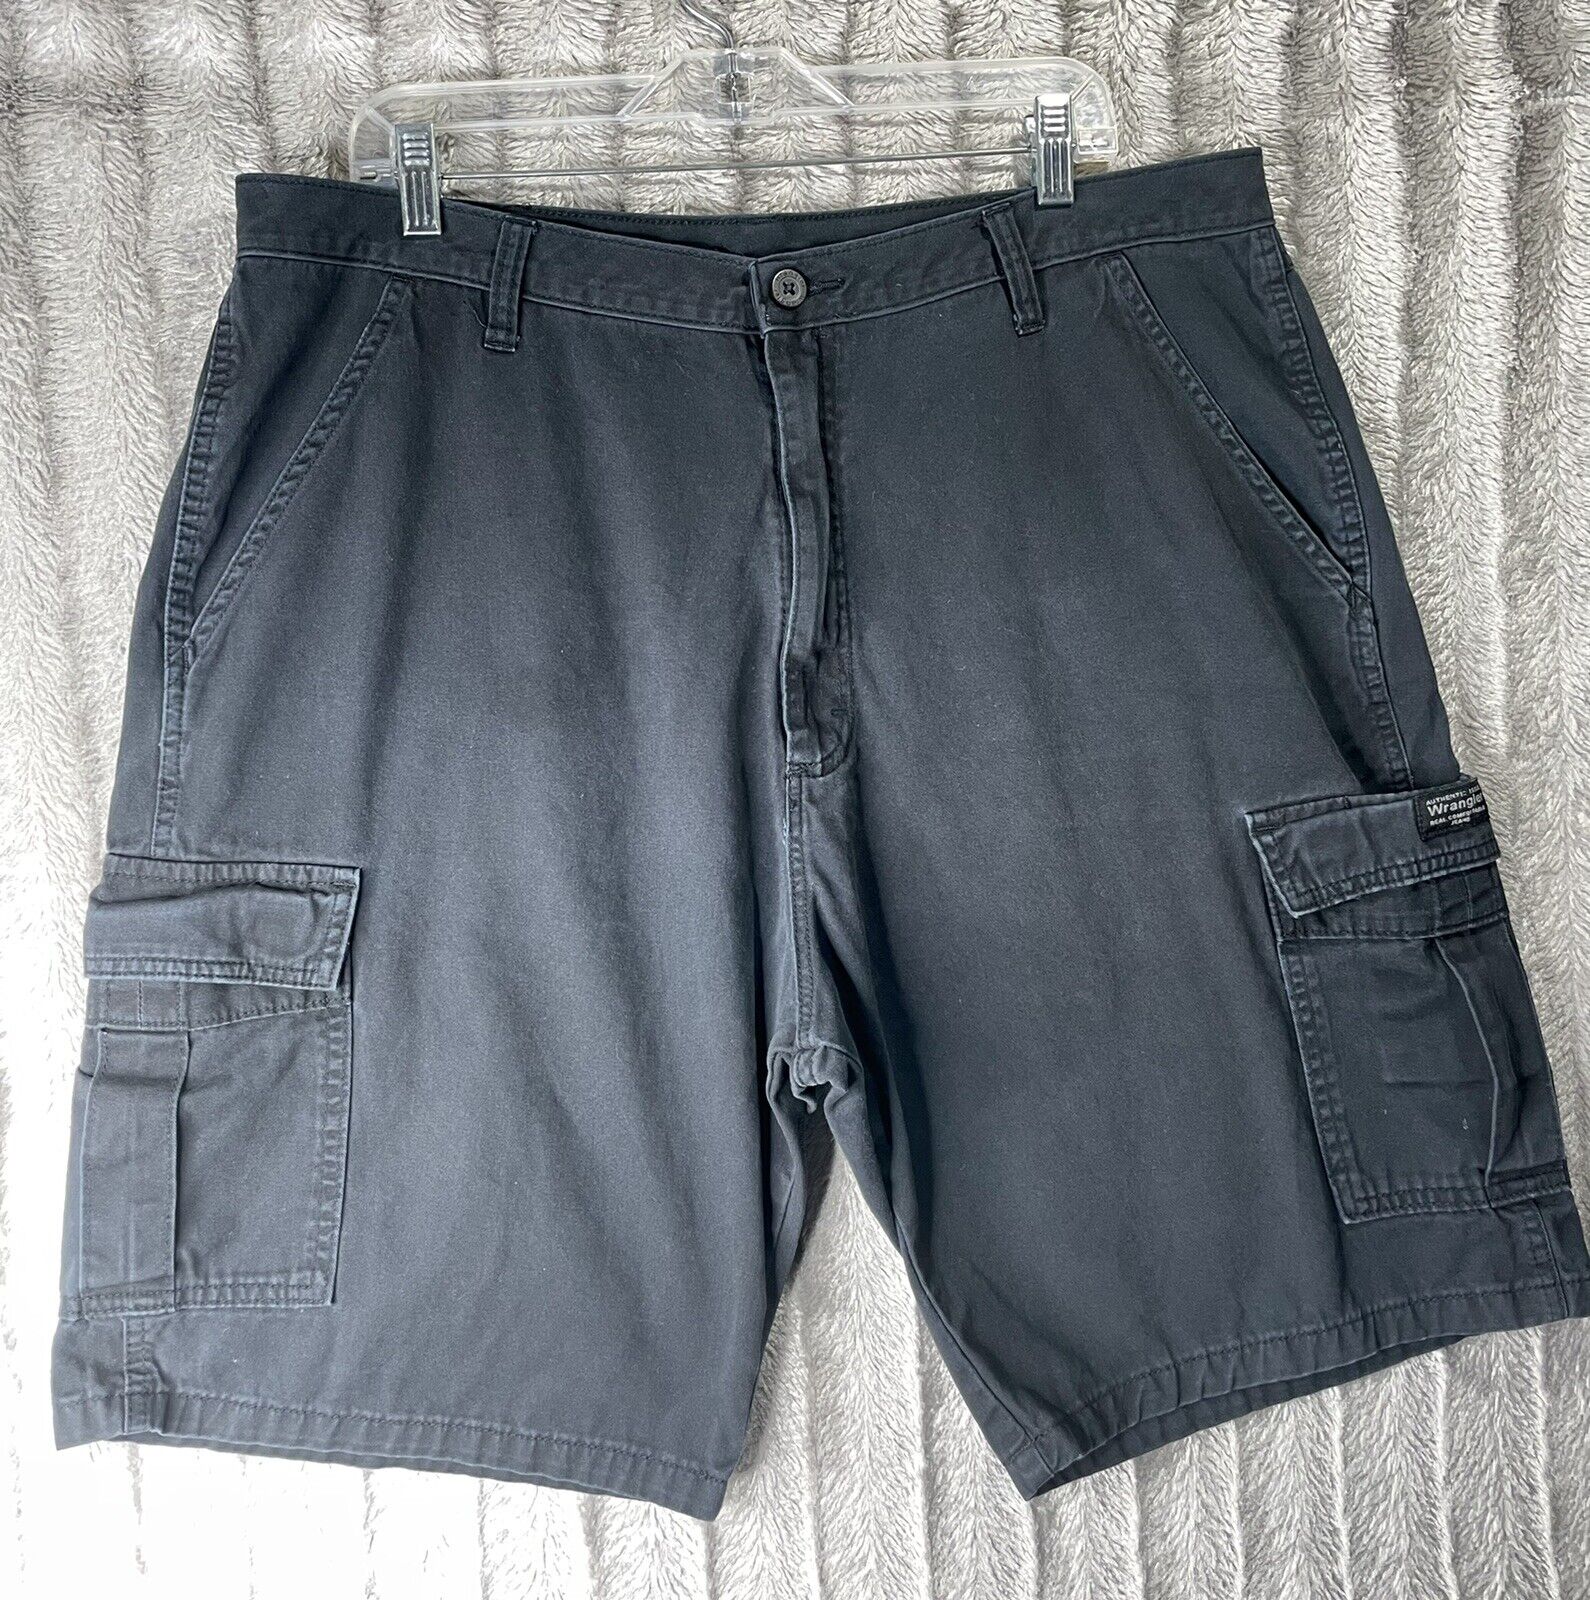 Actualizar 30+ imagen authentic issue wrangler real comfortable jeans cargo shorts